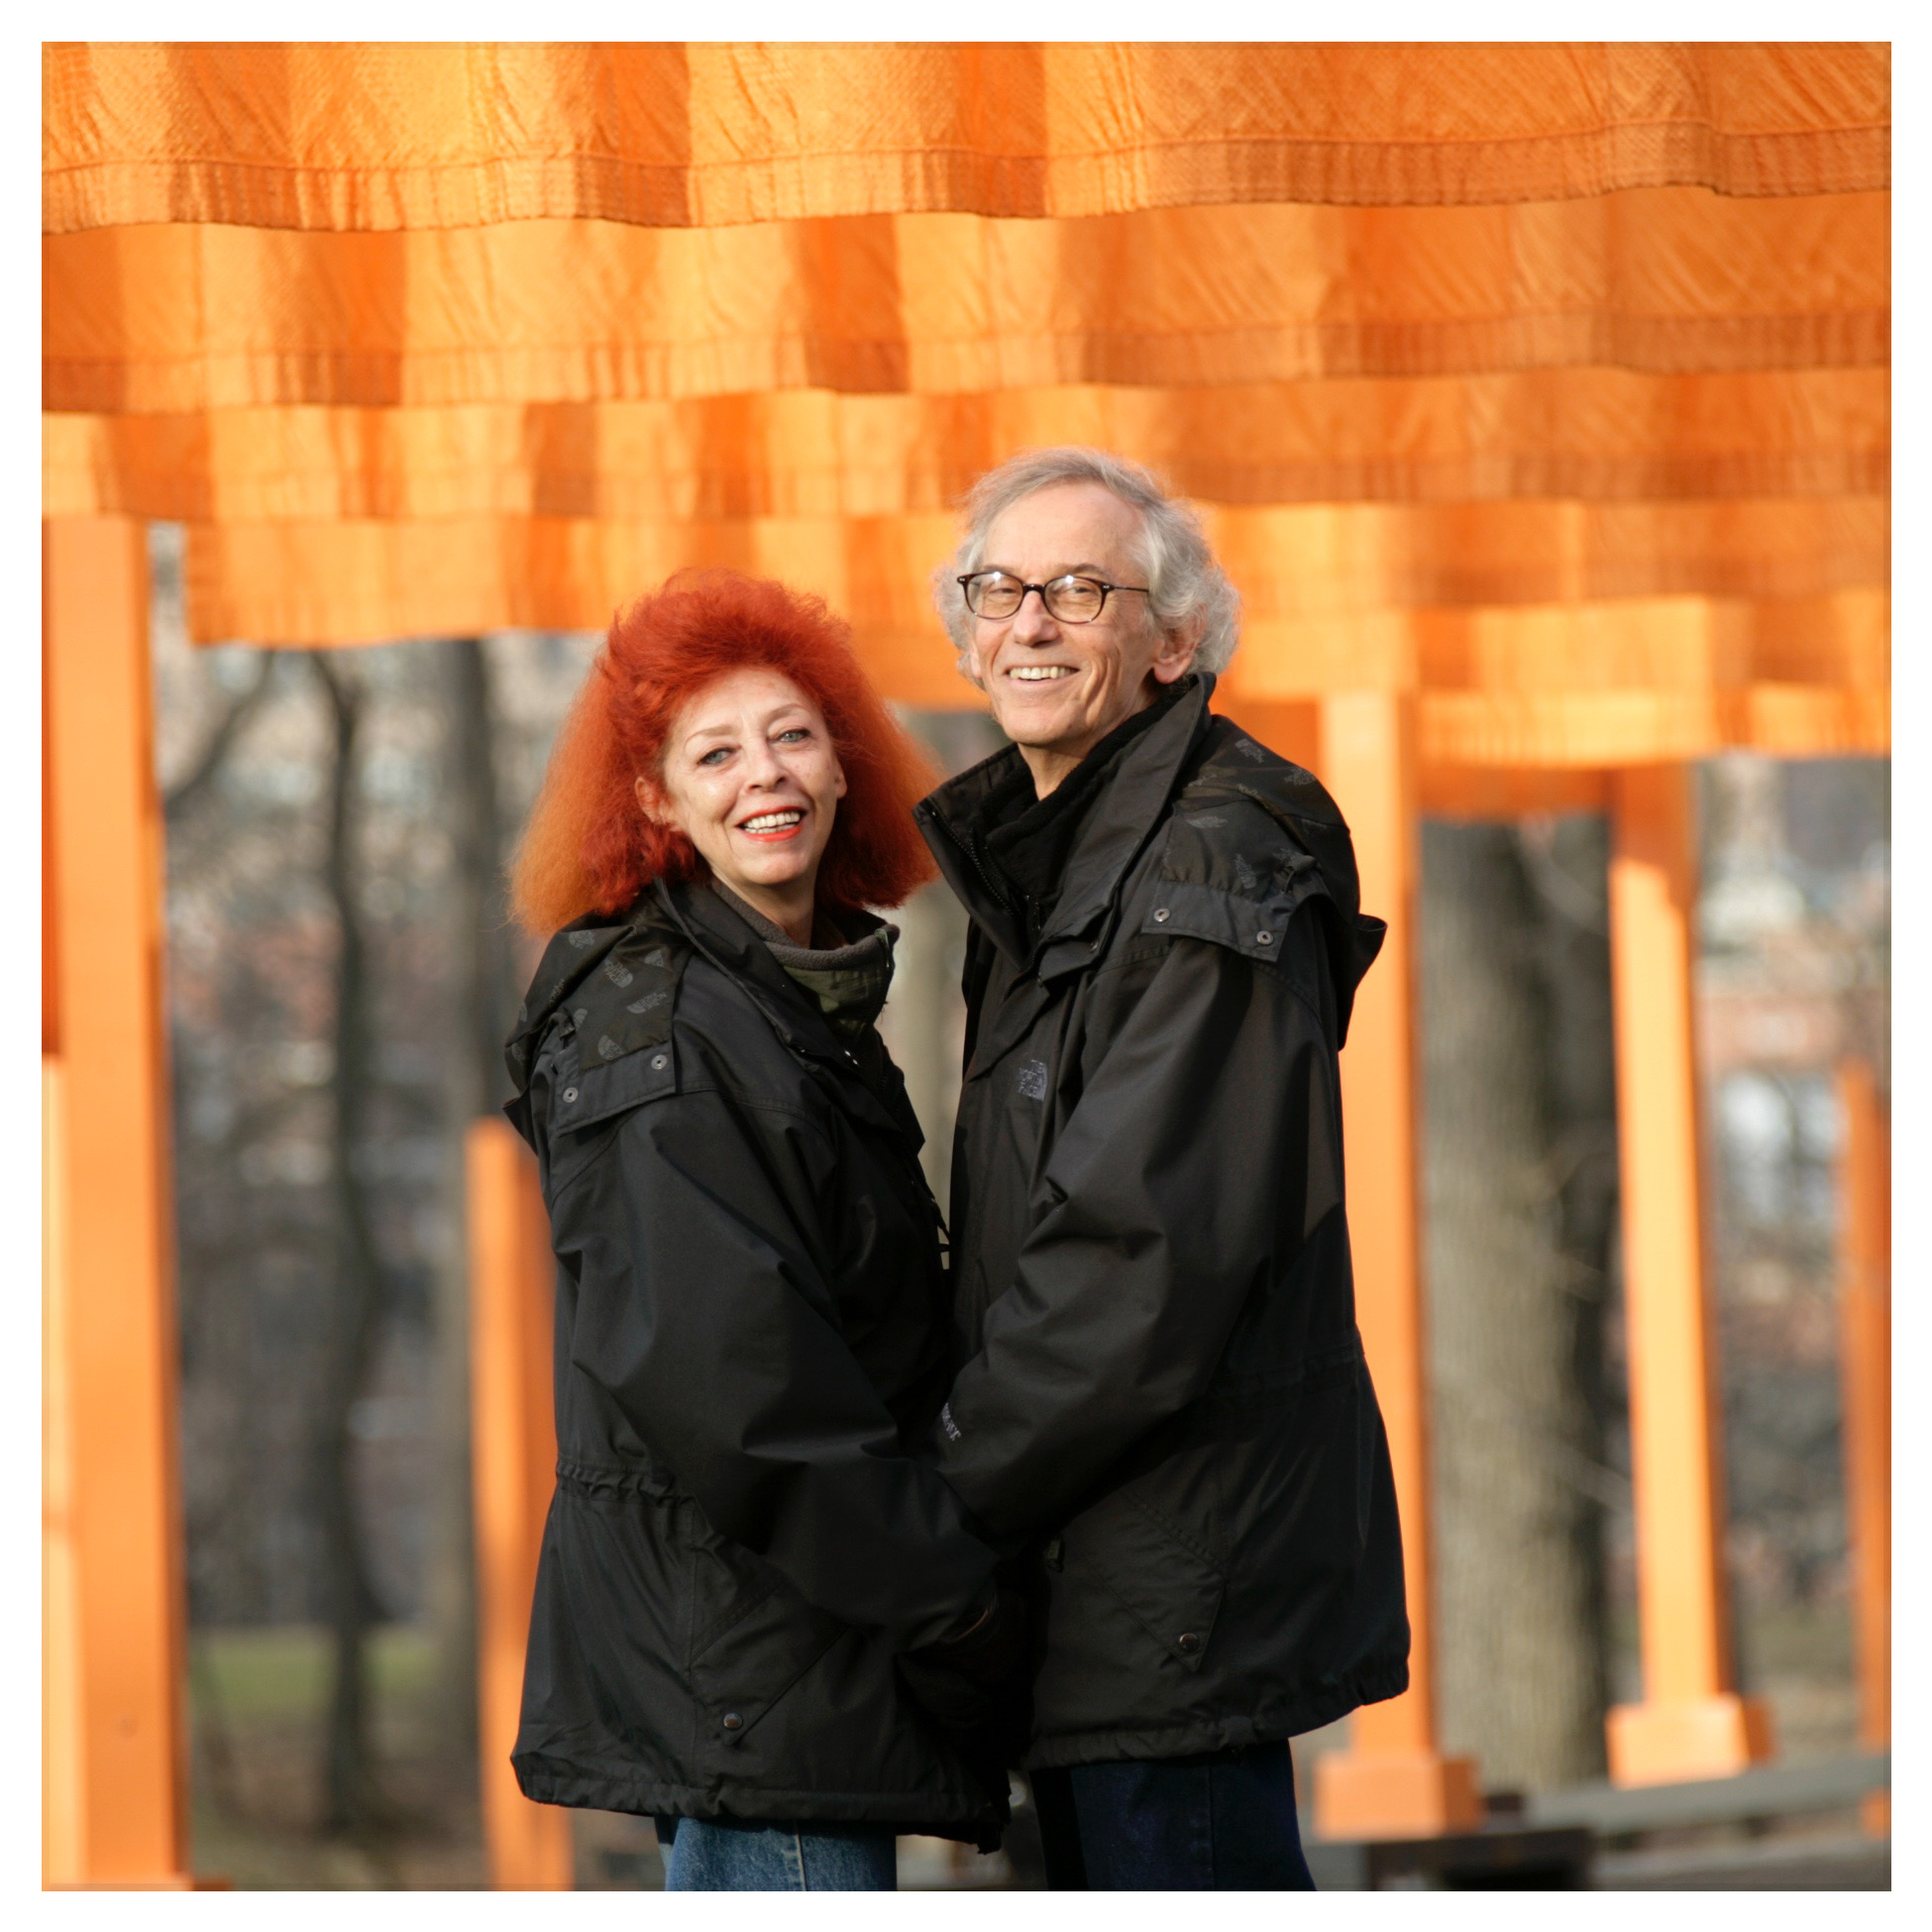 Christo and Jeanne-Claude 2005, The Gates, Photo Wolfgang Volz, courtesy Christo 2005.